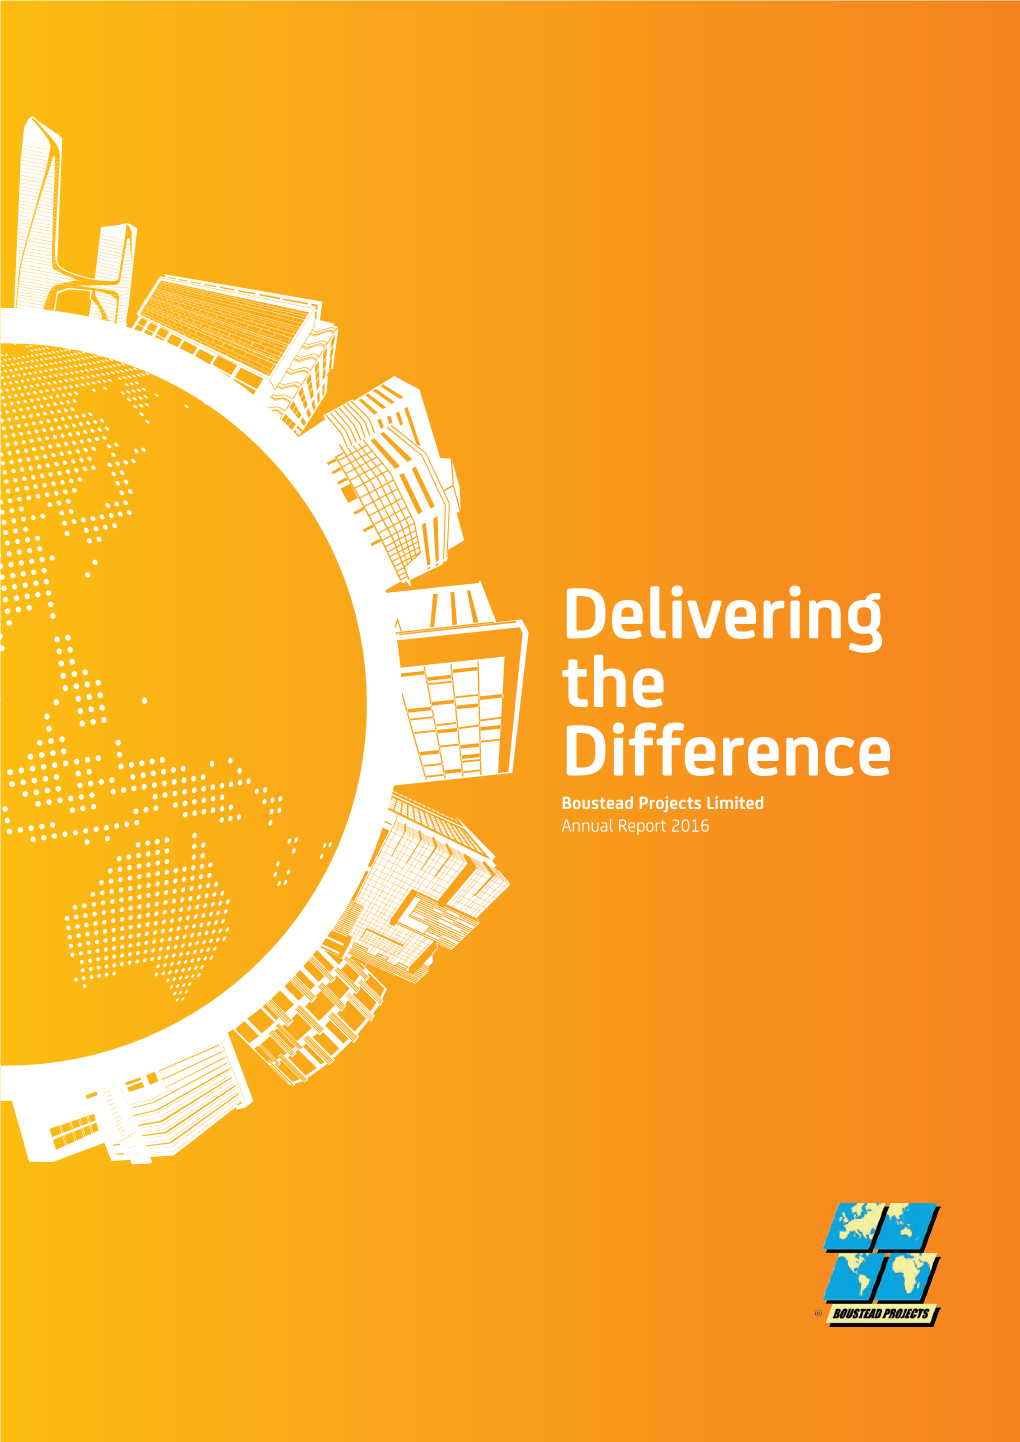 Delivering the Difference Boustead Projects Limited Annual Report 2016 Delivering the Difference